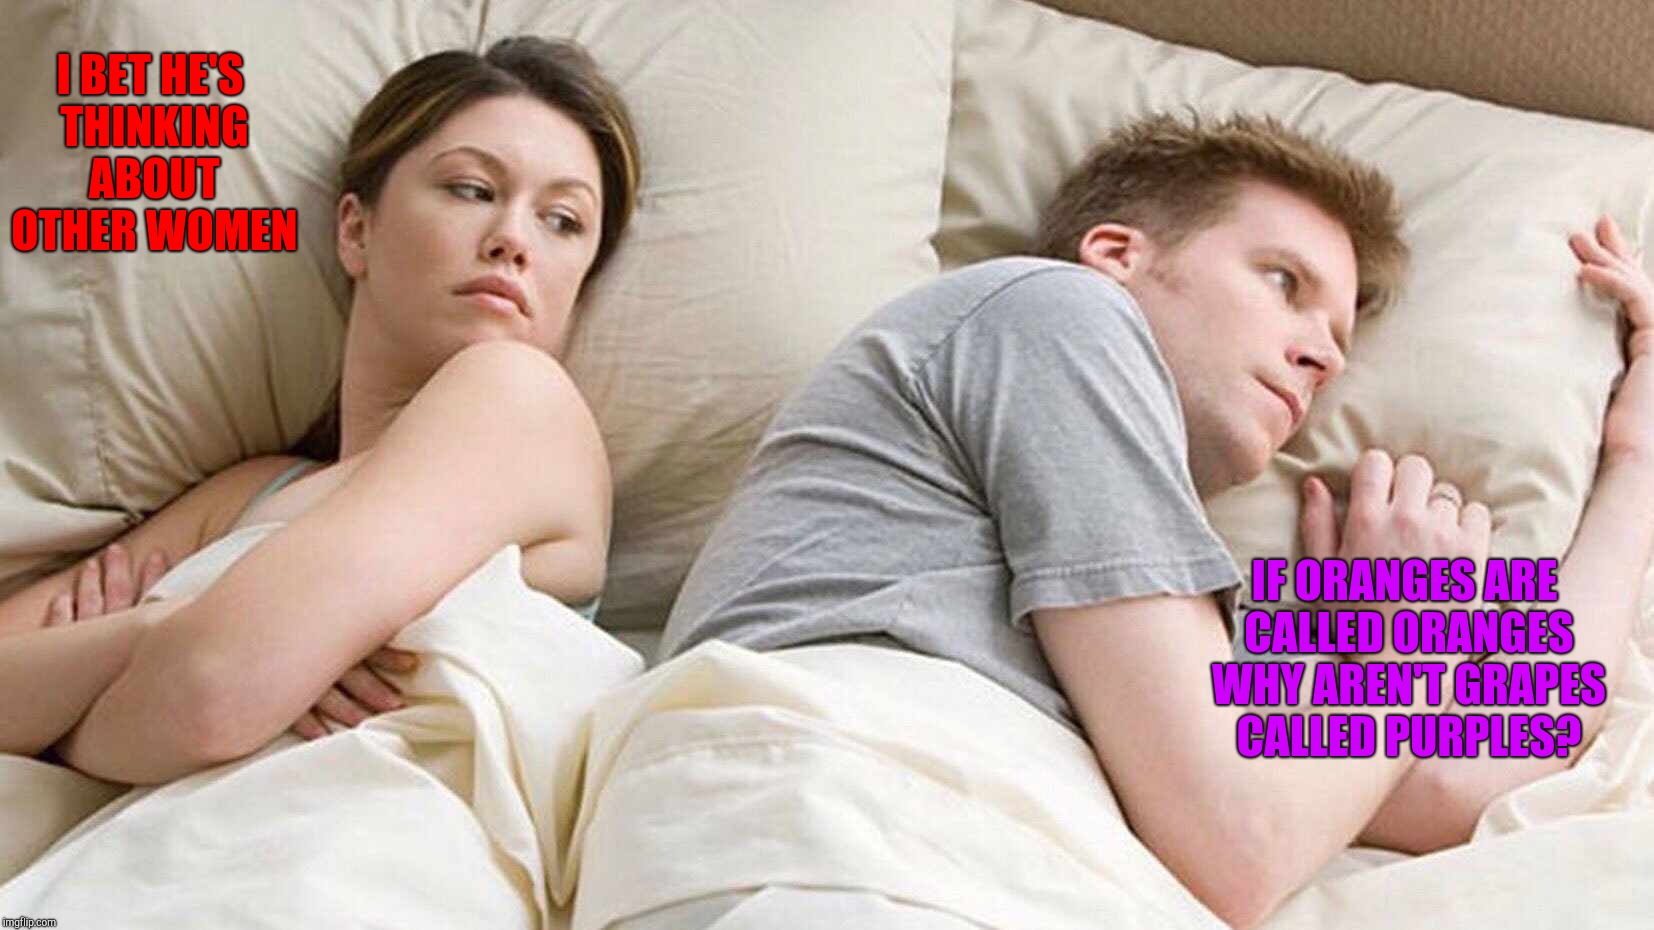 I Bet He's Thinking About Other Women | I BET HE'S THINKING ABOUT OTHER WOMEN; IF ORANGES ARE CALLED ORANGES WHY AREN'T GRAPES CALLED PURPLES? | image tagged in i bet he's thinking about other women | made w/ Imgflip meme maker